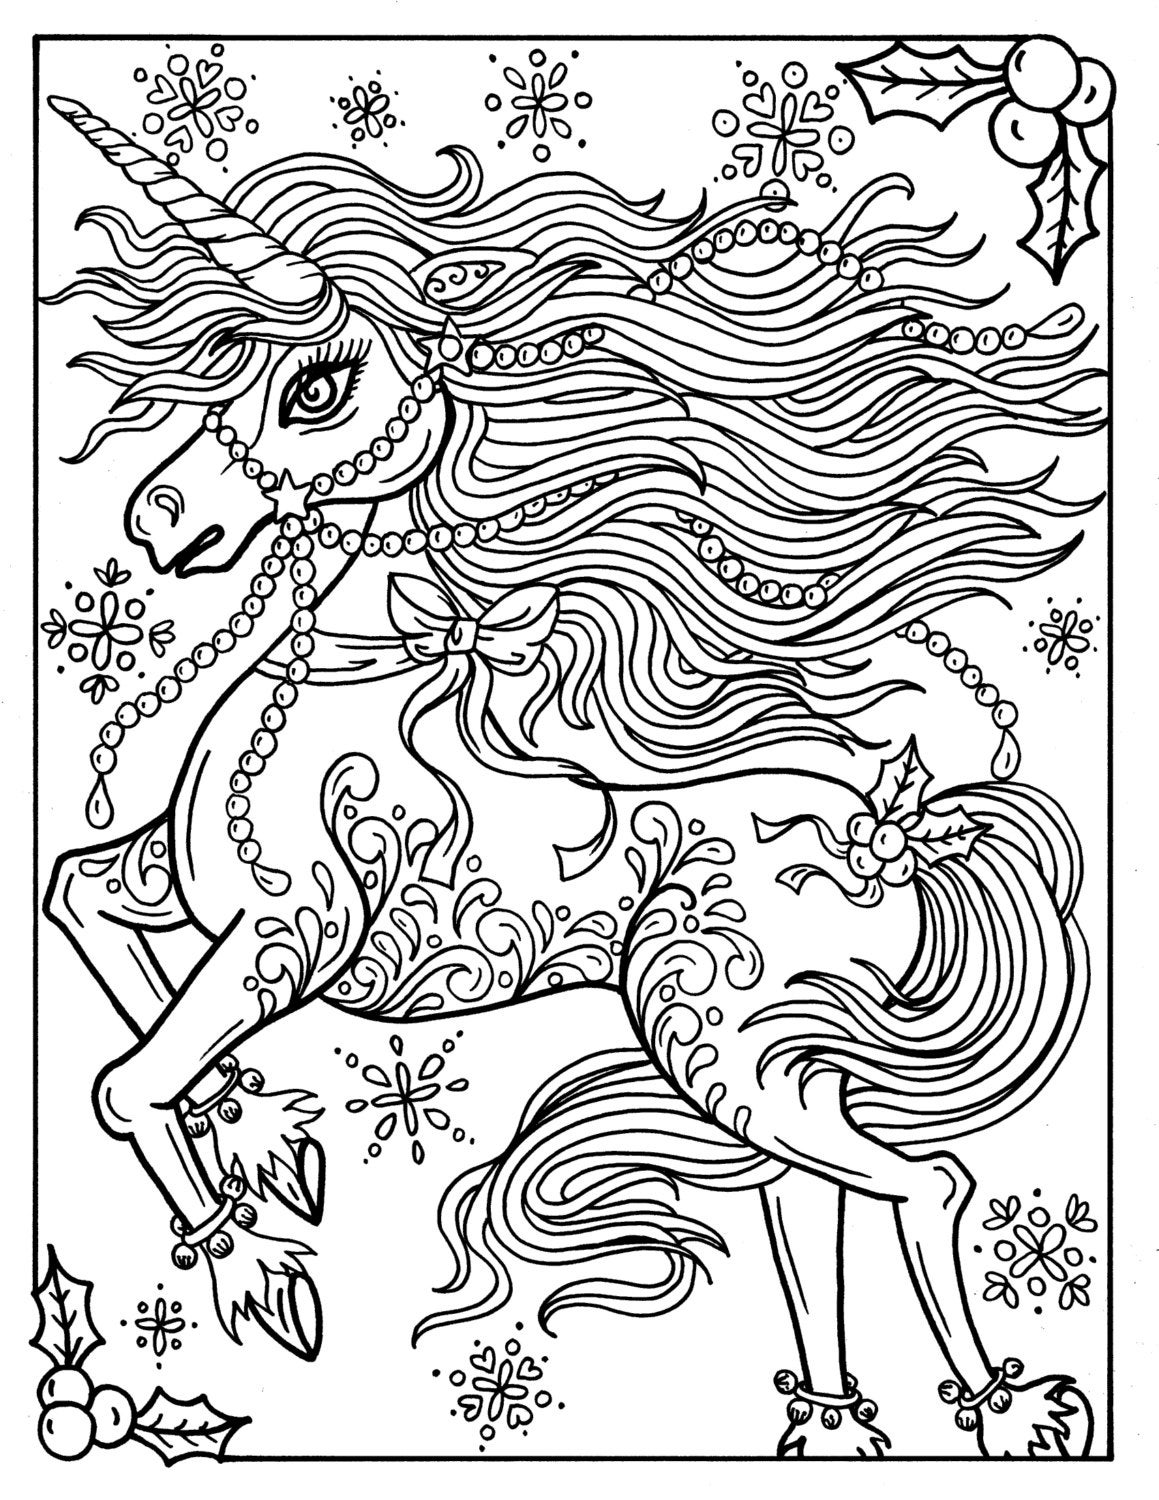 Christmas Unicorn Adult Coloring Page Coloring Book Holidays | Etsy Ireland